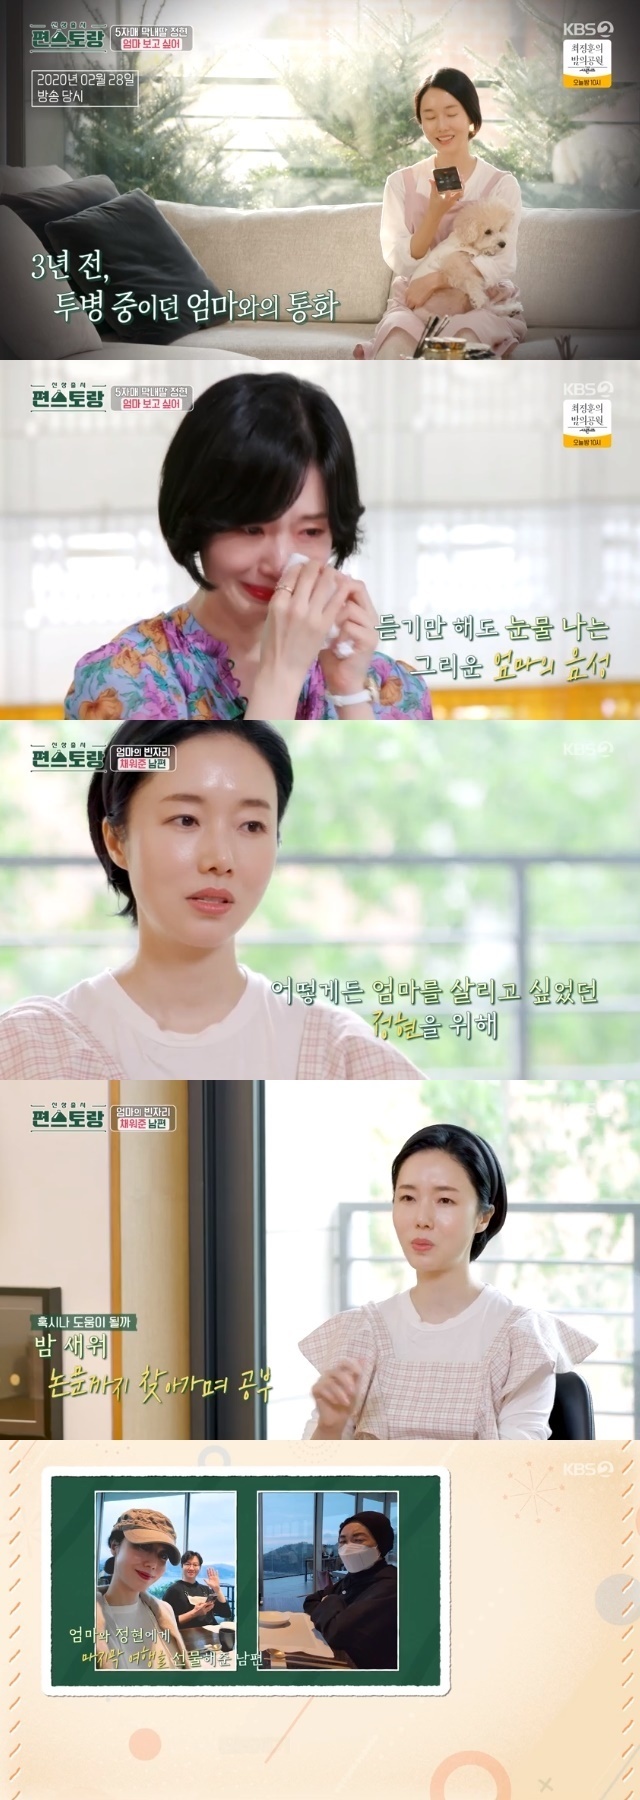 Singer and actor Lee Jung-hyun thanked Husband for his hard work during his fight against his late mother.In the 184th KBS 2TV entertainment Stars Top Recipe at Fun-Staurant (hereinafter Stars Top Recipe at Fun-Staurant) broadcast on July 14, Lee Jung-hyun revealed his longing for his mother who died during the illness.On this day, Lee Jung-hyun immersed the water kimchi. Suddenly, in the summer, he recalled the mother who immersed the kimchi in the heat.Lee Jung-hyun said that the mother raised five sisters and gave them 9 meals and 12 meals. I lived with Mother Dad until marriage and spent the longest time with Mother.Im so sad because I always sleep next to him, Confessions said.Lee Jung-hyun made a side dish for Mother who was hospitalized at the time of appearing on Stars Top Recipe at Fun-Staurant three years ago.Lee Jung-hyun commented, My mother was in full bloom as I filmed Stars Top Recipe at Fun-Staurant.When I got married, I found out that my mother was sick, so my mother stayed in the hospital for a very long time. I hated hospital food so much that I took home-cooked meals and home-cooked dishes to the hospital and prepared them for my mother, he recalled.Lee Jung-hyuns But my mother died.Its been three years since he died. After Confessions, Lee Jung-hyun appeared on the Stars Top Recipe at Fun-Staurant and made a phone call with his mother.Lee Jung-hyun said, Its been a long time since I heard my mothers voice.Since then, Lee Jung-hyun has also expressed gratitude for Husband.Lee Jung-hyun, especially in childbirth and childcare, said, Whenever I was tired, Bridegroom gave me a lot of story-telling, and when I went to give birth to a child, I would have asked Mother if I had a mother.Bridegroom saved a years vacation and then gave birth and took two weeks off. It was nice to be with you. Lee Jung-hyun said at the time of Mothers illness, I asked Bridegroom a lot because I wanted to save Mother too much.Bridegroom found a lot of papers all night and showed them to me, he said. I did not express it, but I appreciate it. In addition to this, the fact that Husband presented Lee Jung-hyun and Mother with their last trip was also revealed.